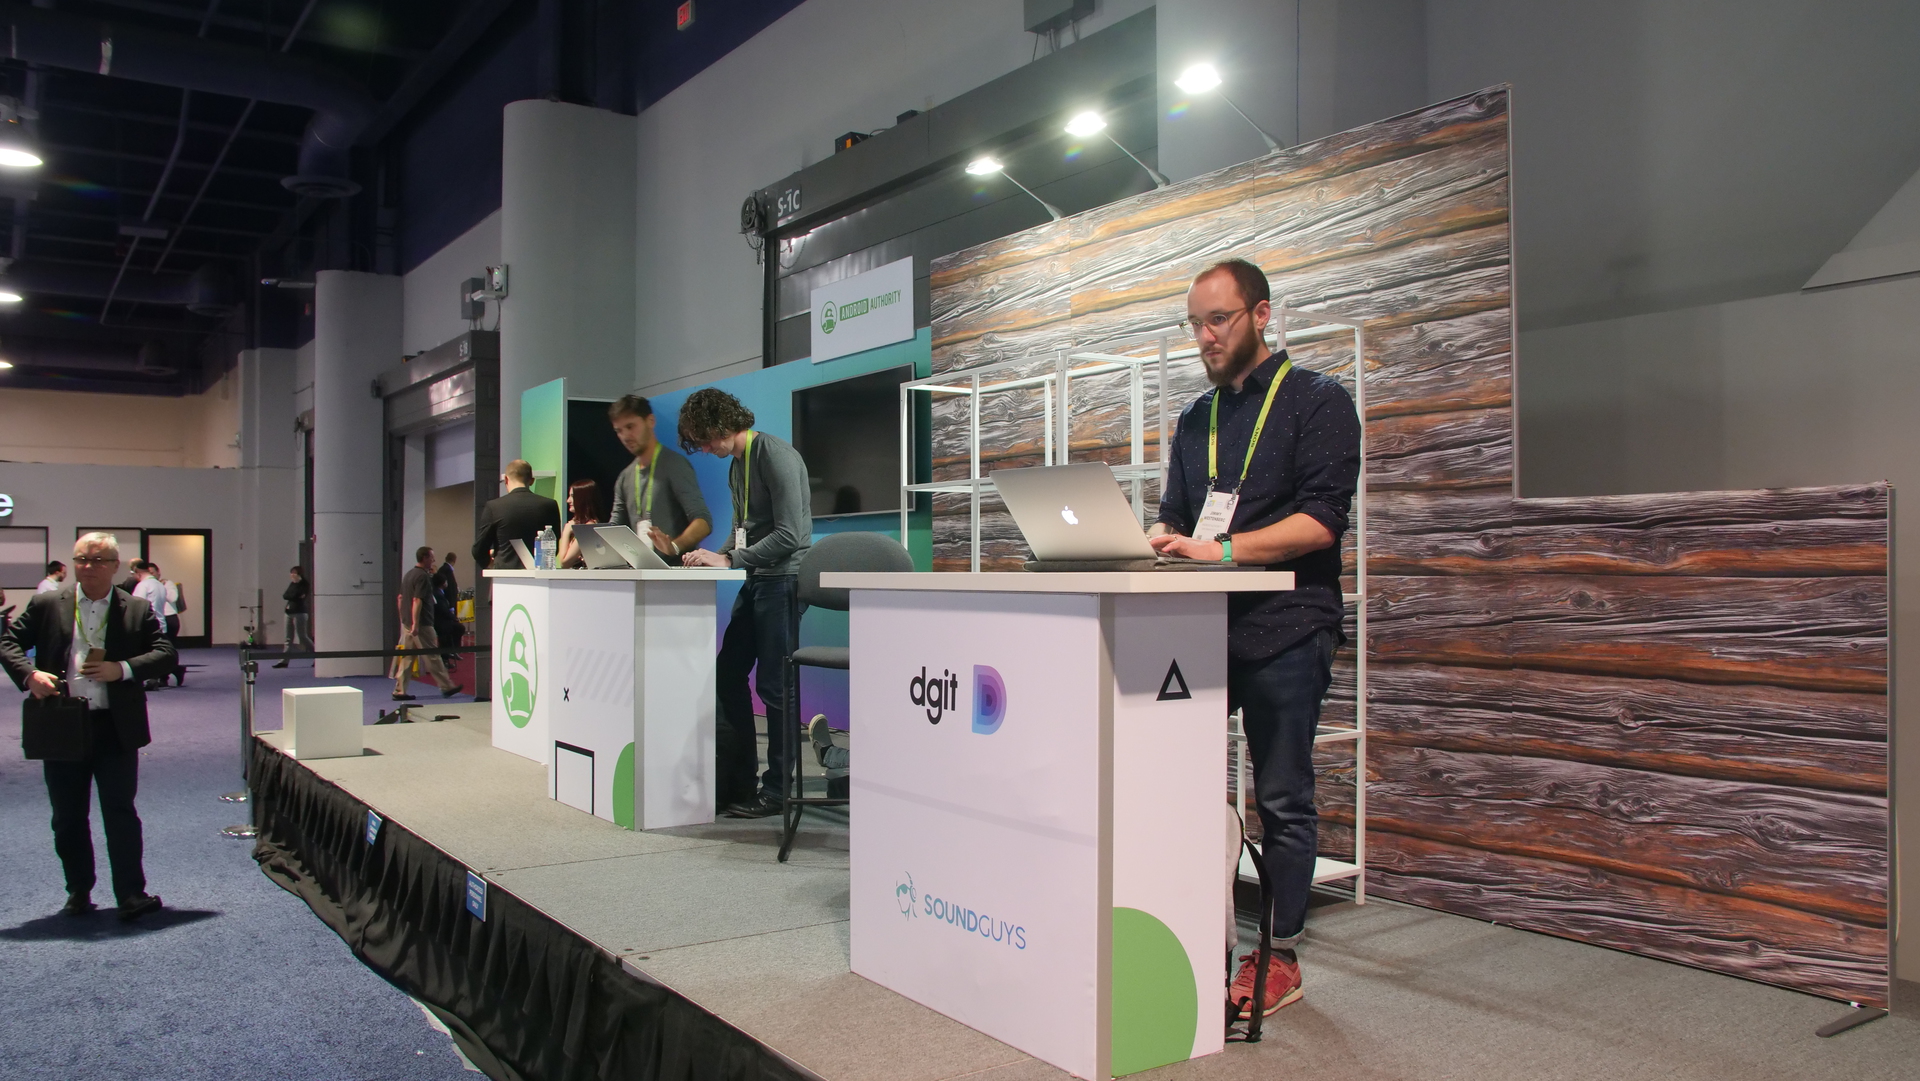 Android Authority Sound Guys DGIT DroneRush Booth CES 2019